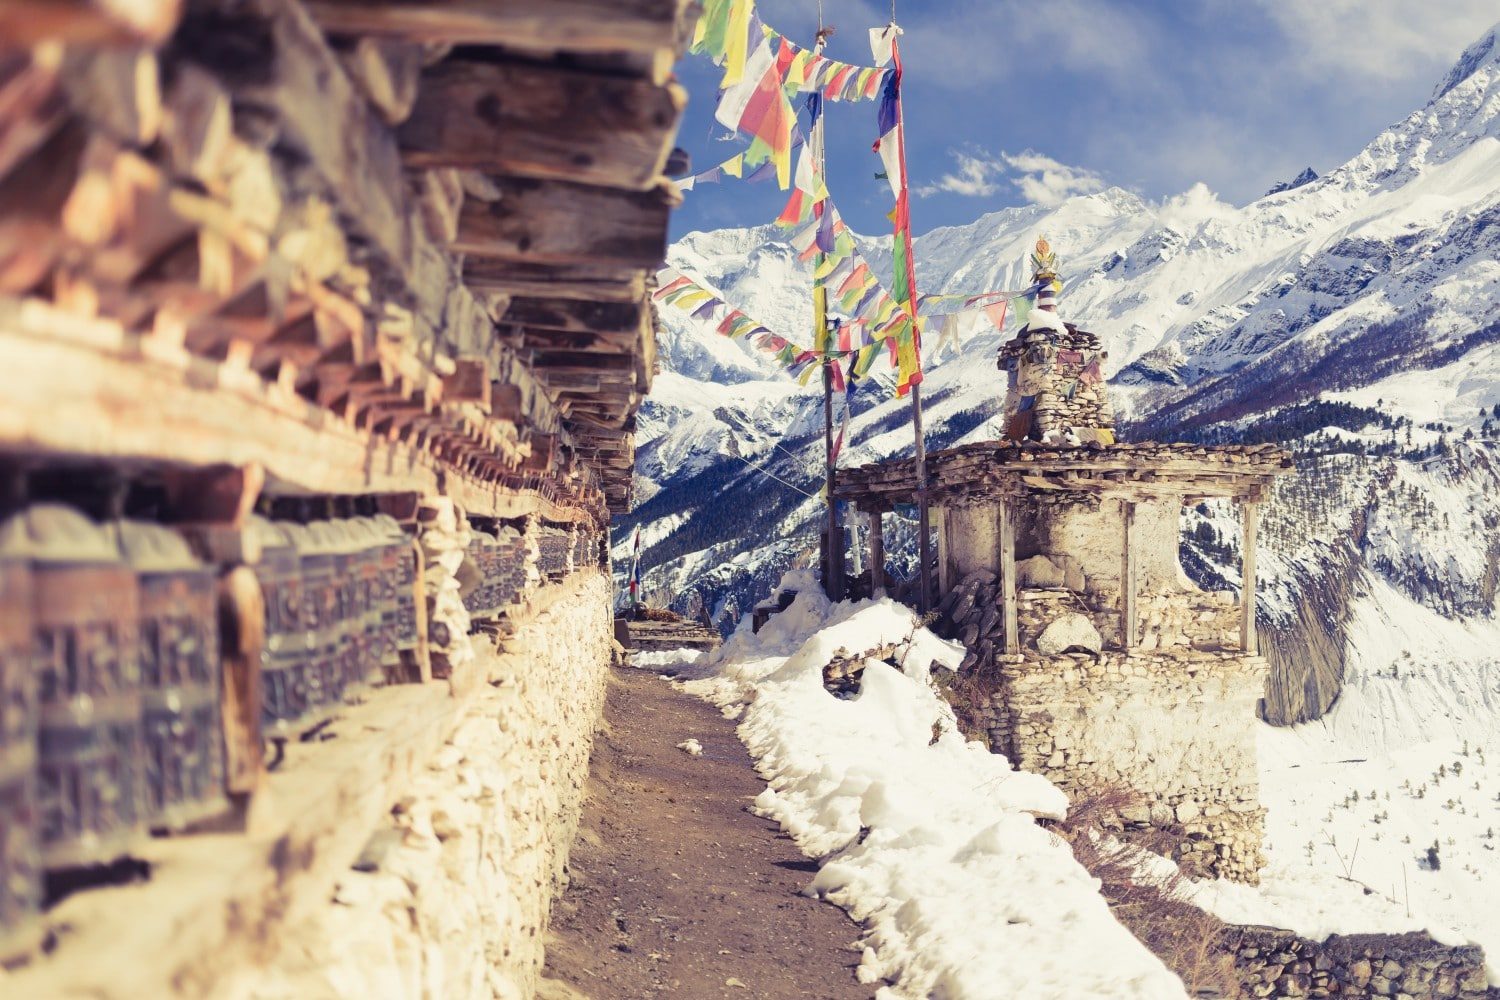  Nepal-One-of-the-cheapest-holiday-destinations-in-the-world